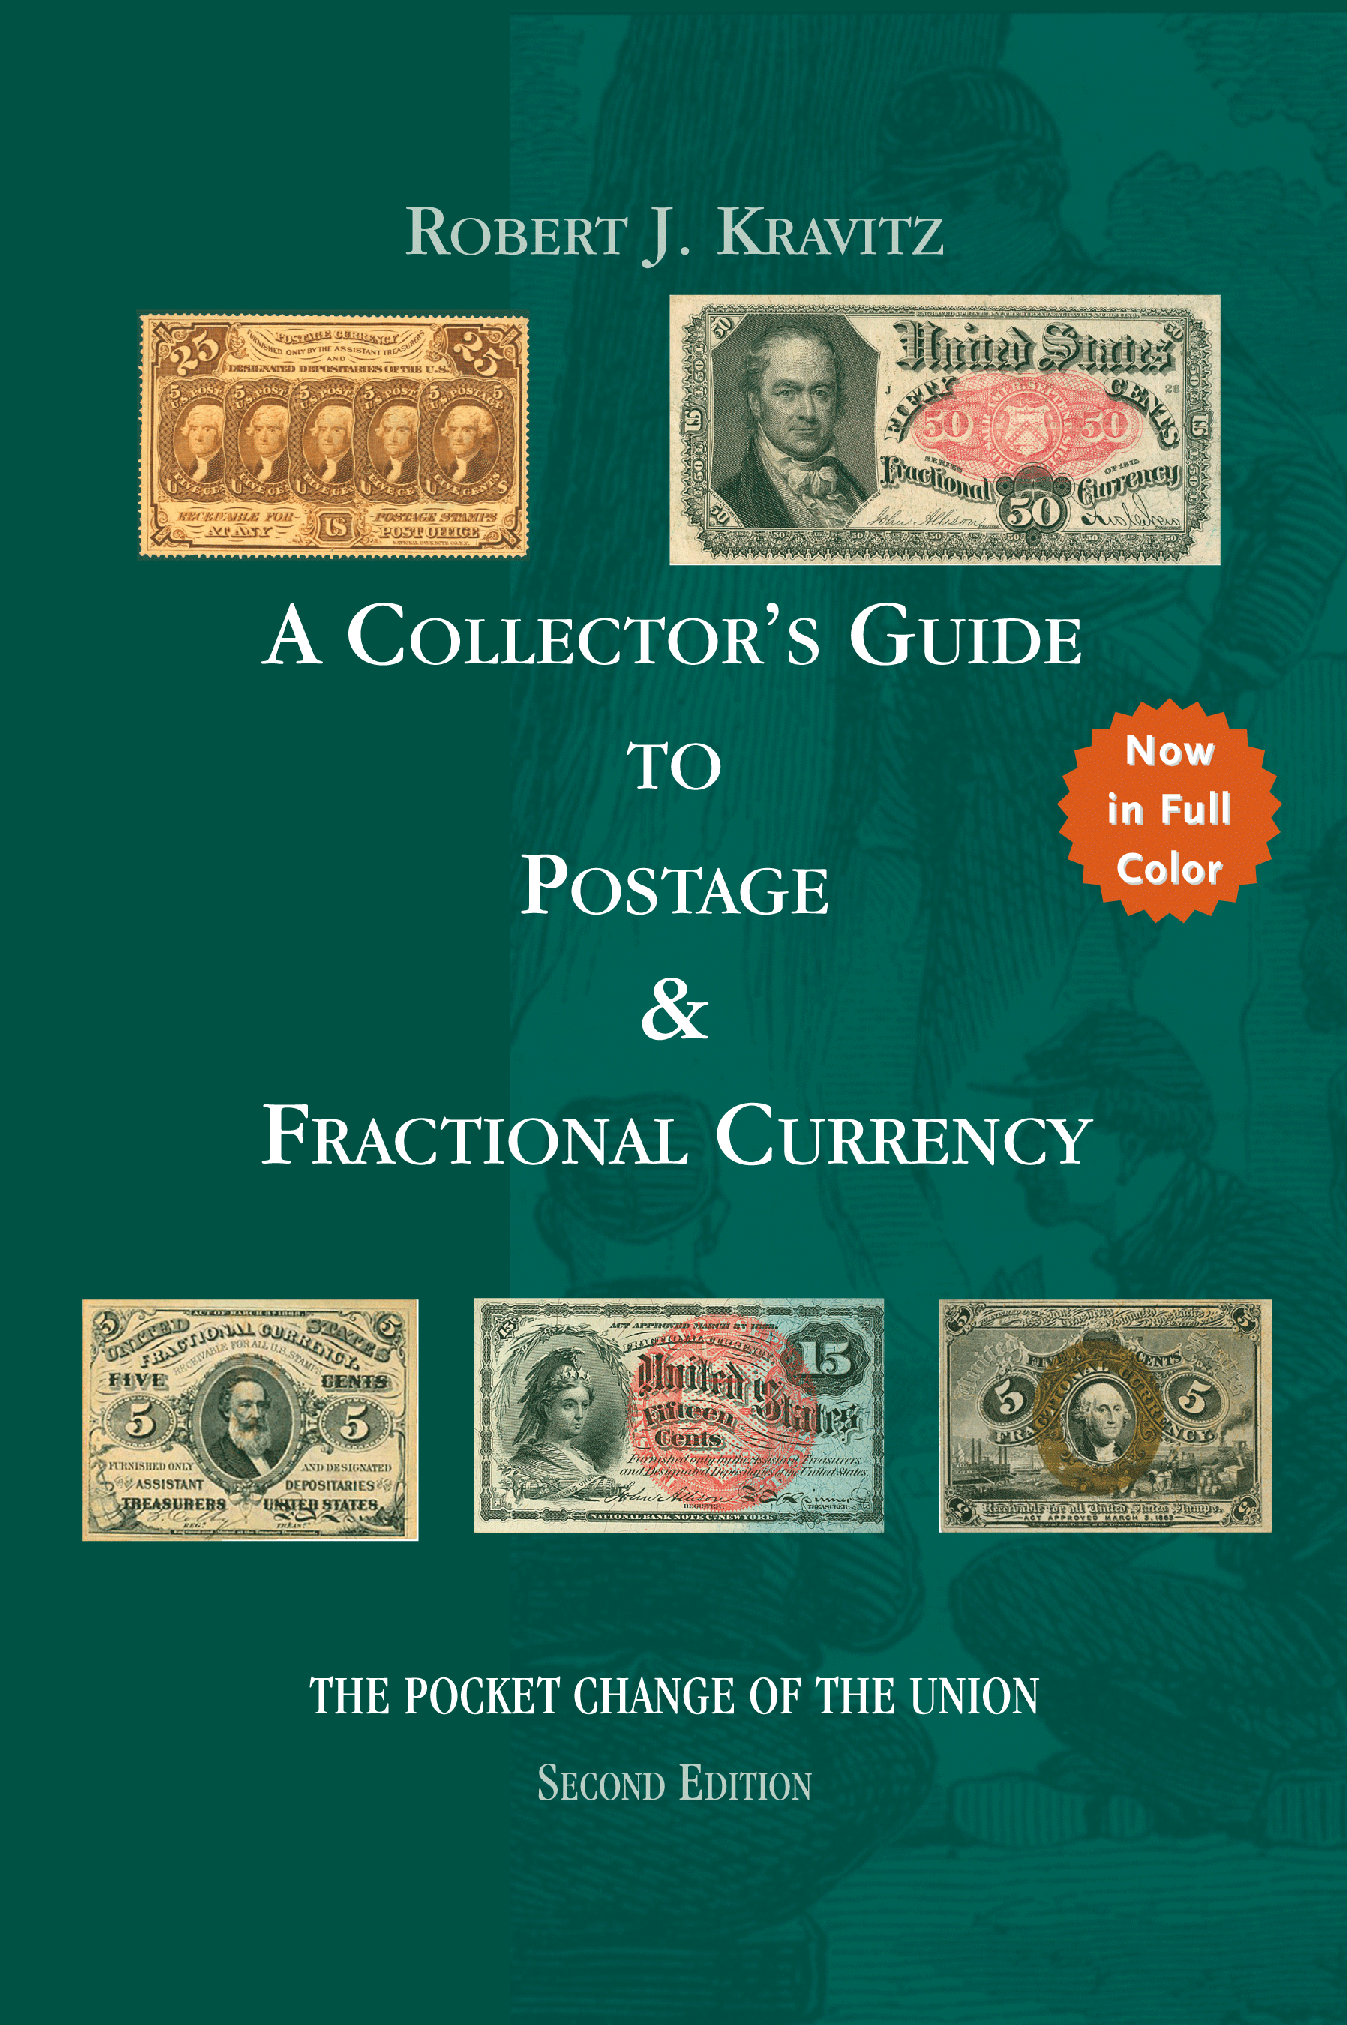 A Collector's Guide to Postage & Fractional Currency. 2nd edition. By Robert J. Kravitz